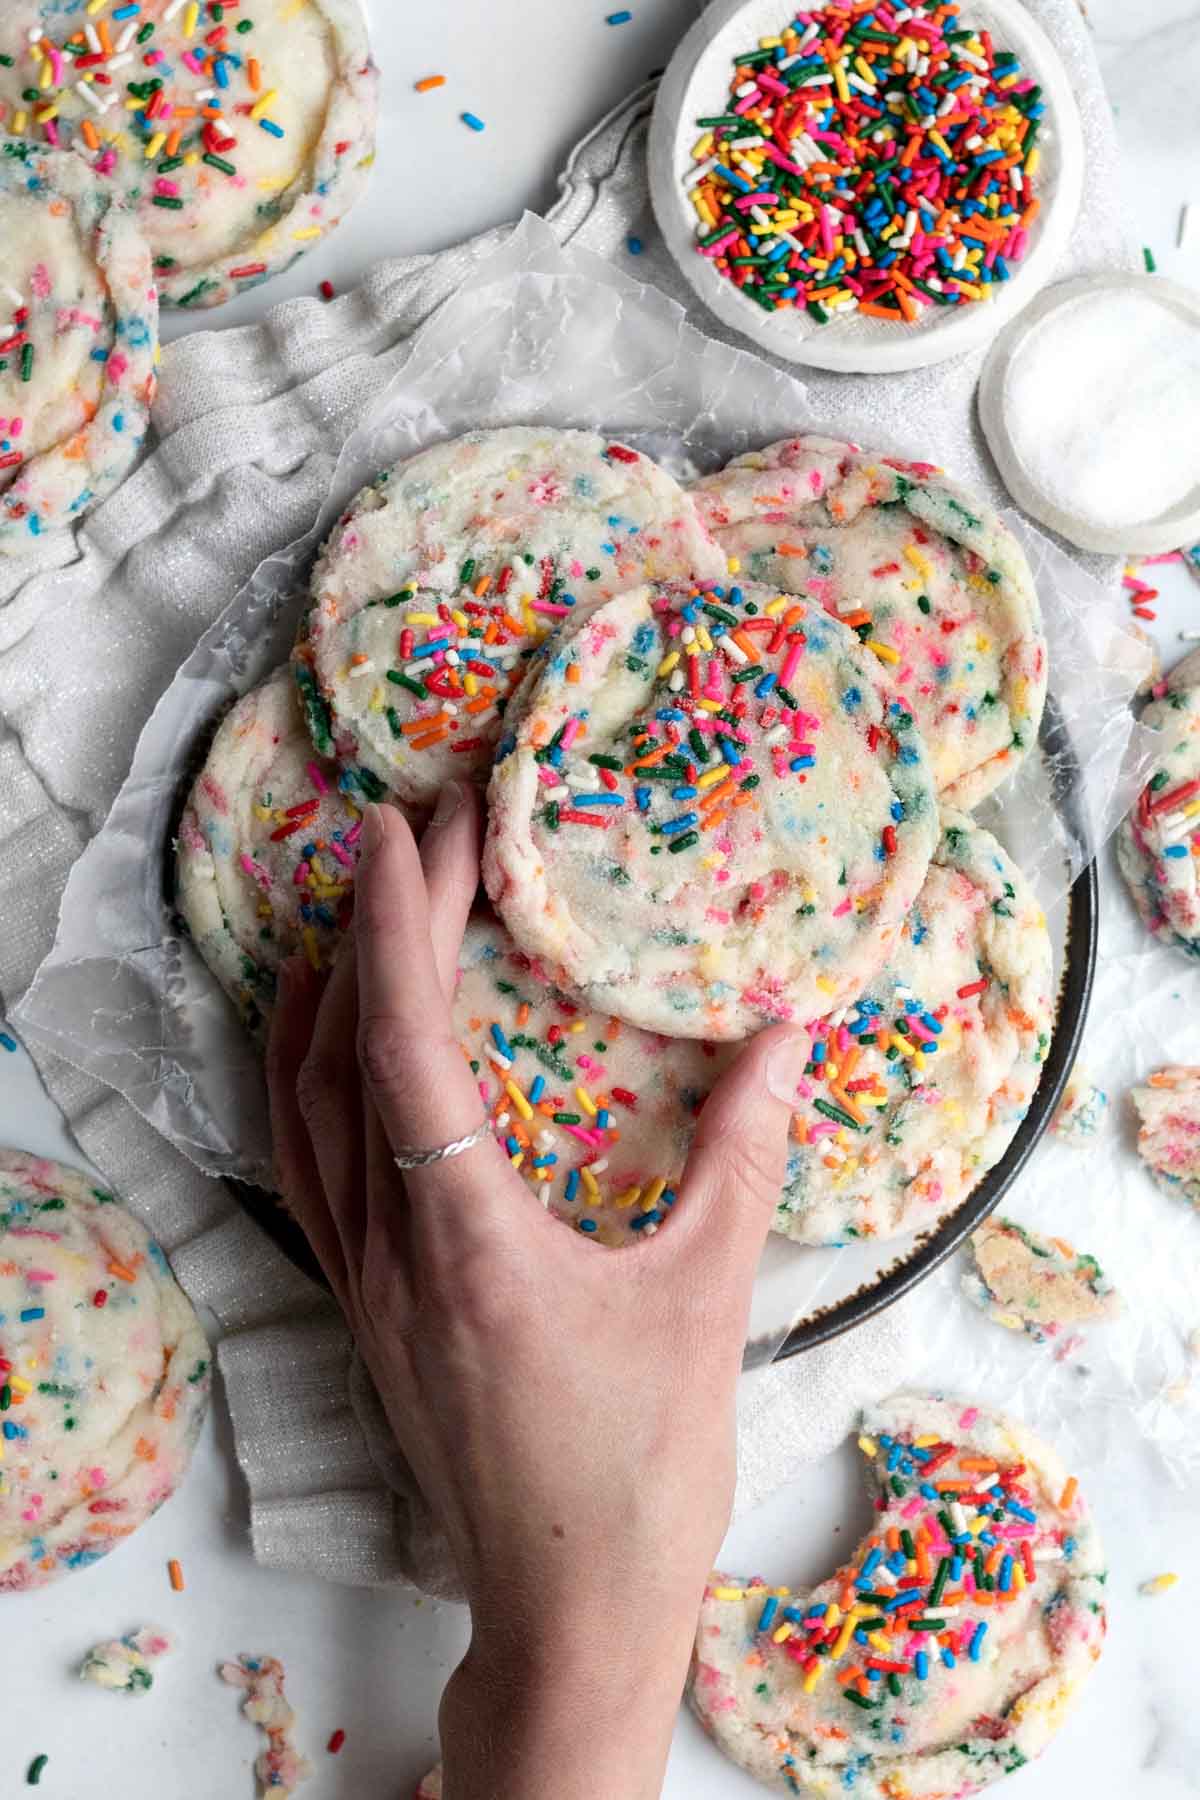 A hand reaches for a sugar cookie from a plate.